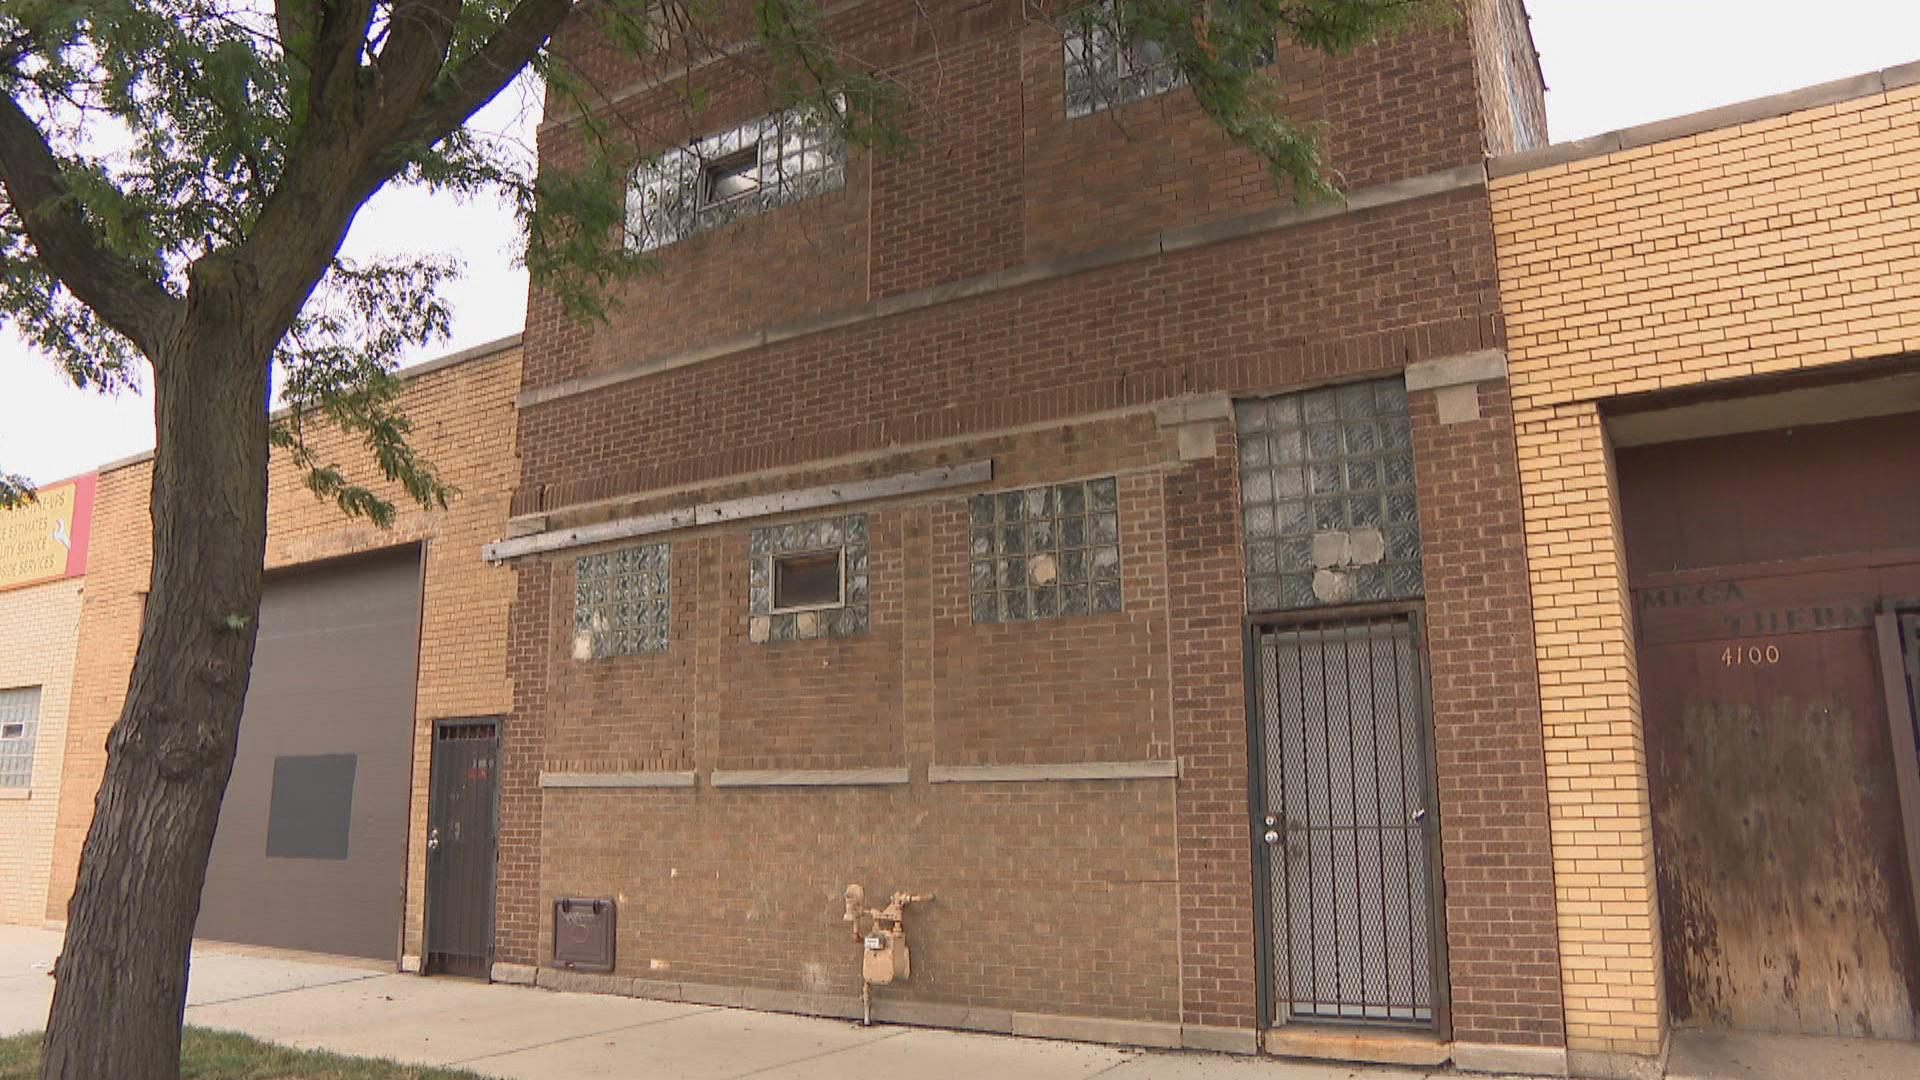 The exterior of a warehouse in the Humboldt Park neighborhood of Chicago, where officials say an illegal party was shut down over the weekend. (WTTW News)